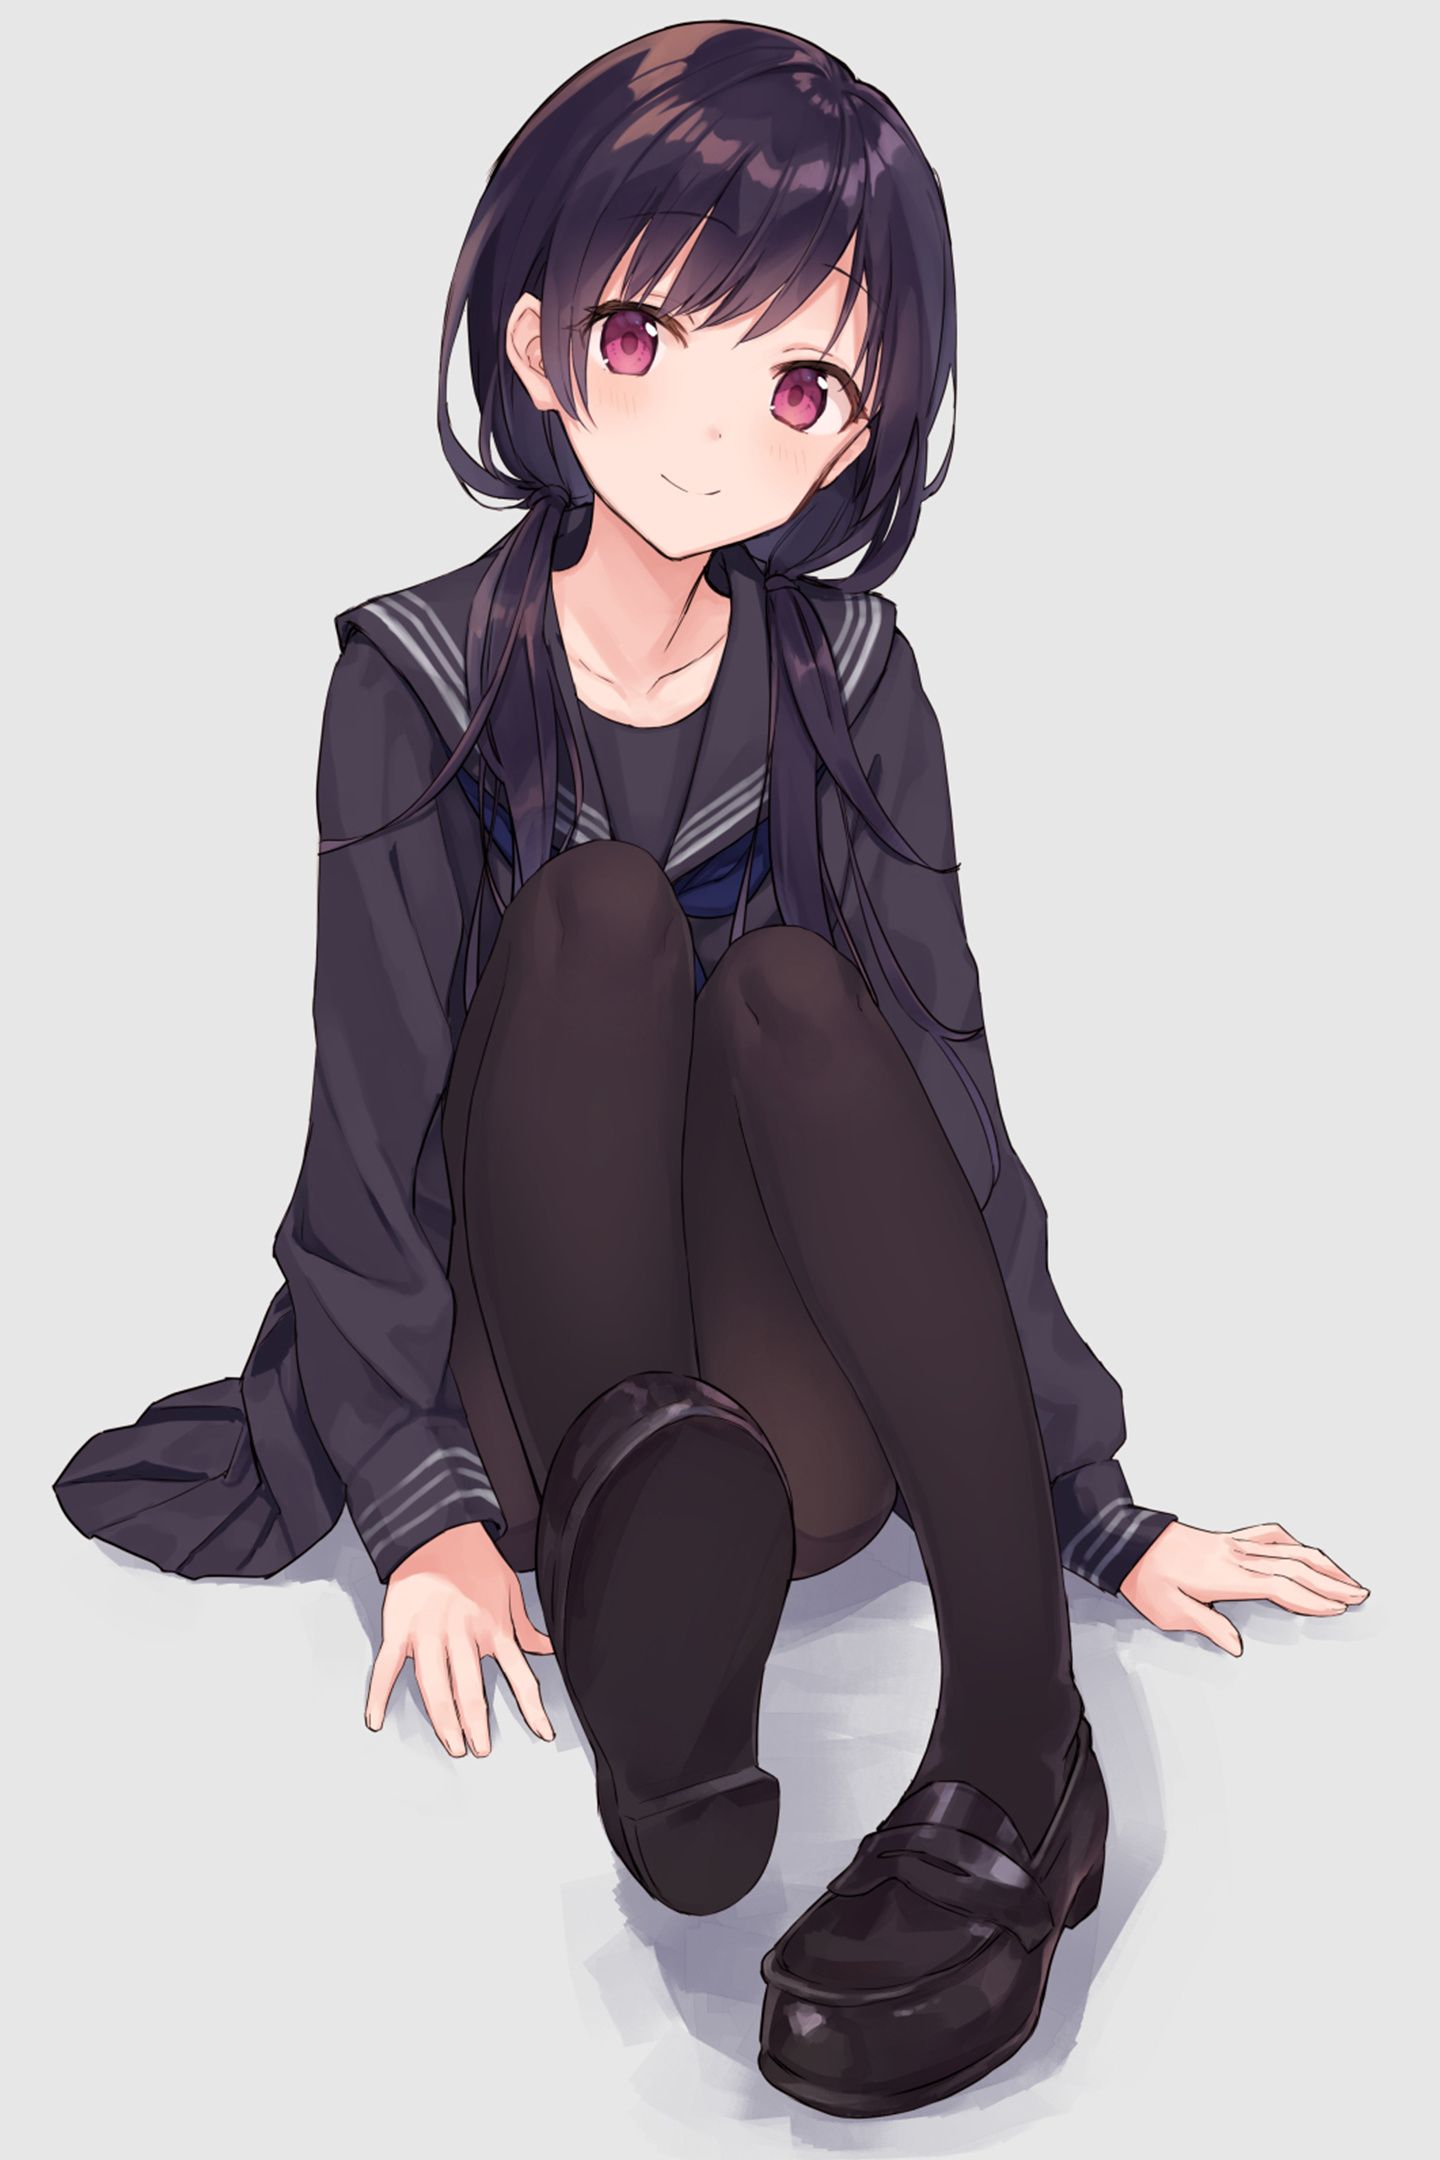 Download cute, anime girl, red eyes, black uniform 1440x2630 wallpaper, samsung galaxy note 1440x2630 HD image, background, 7480